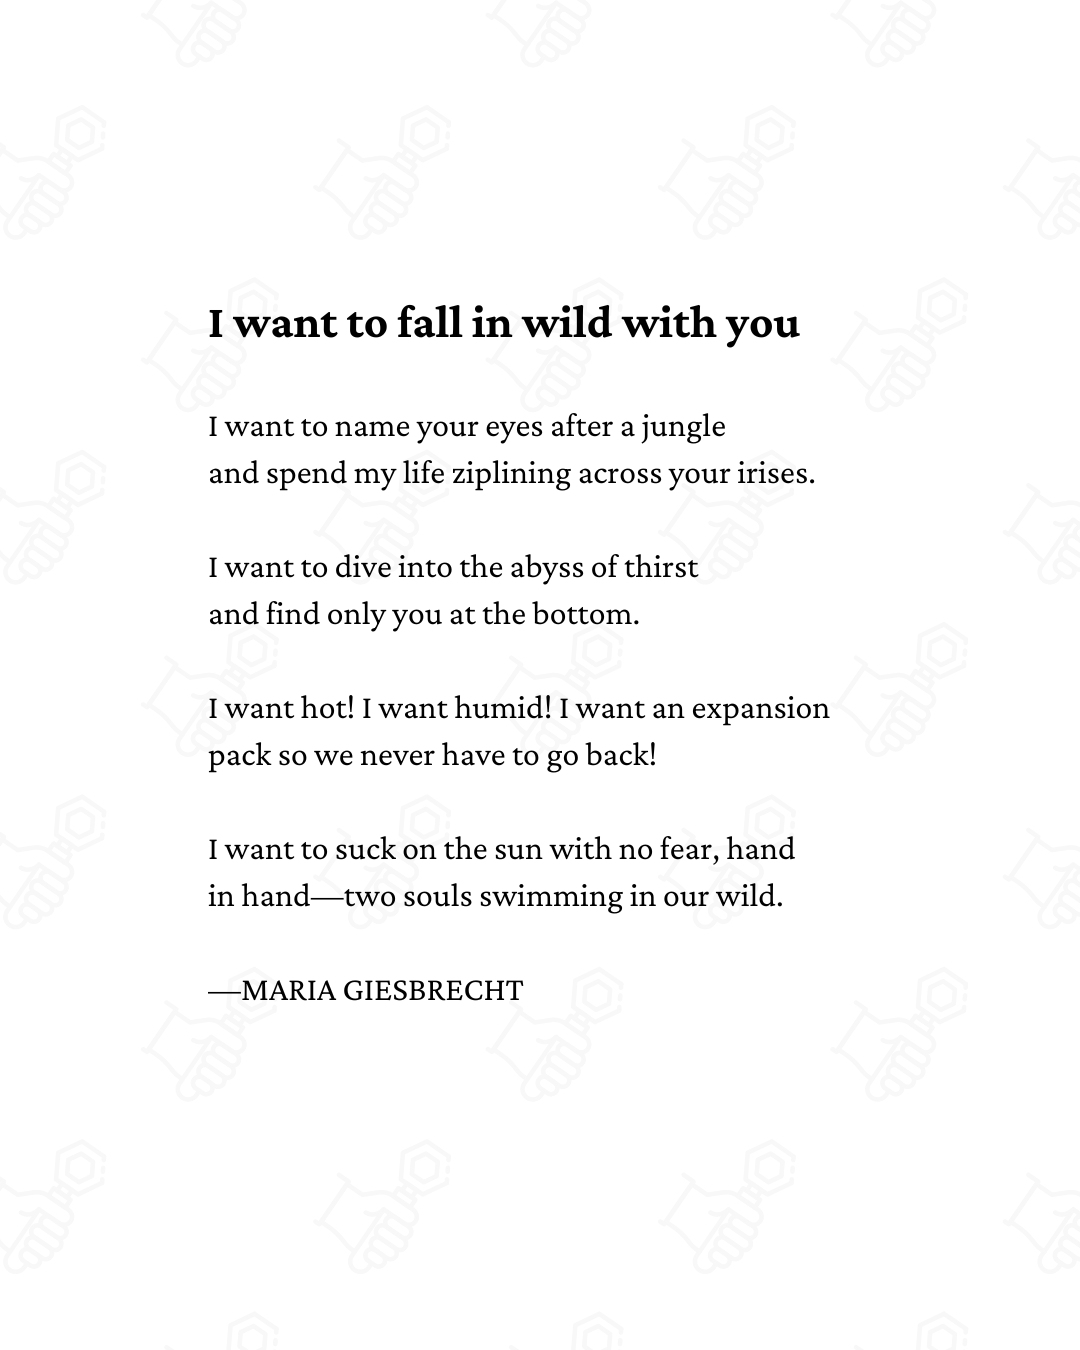 "I want to fall in wild with you"